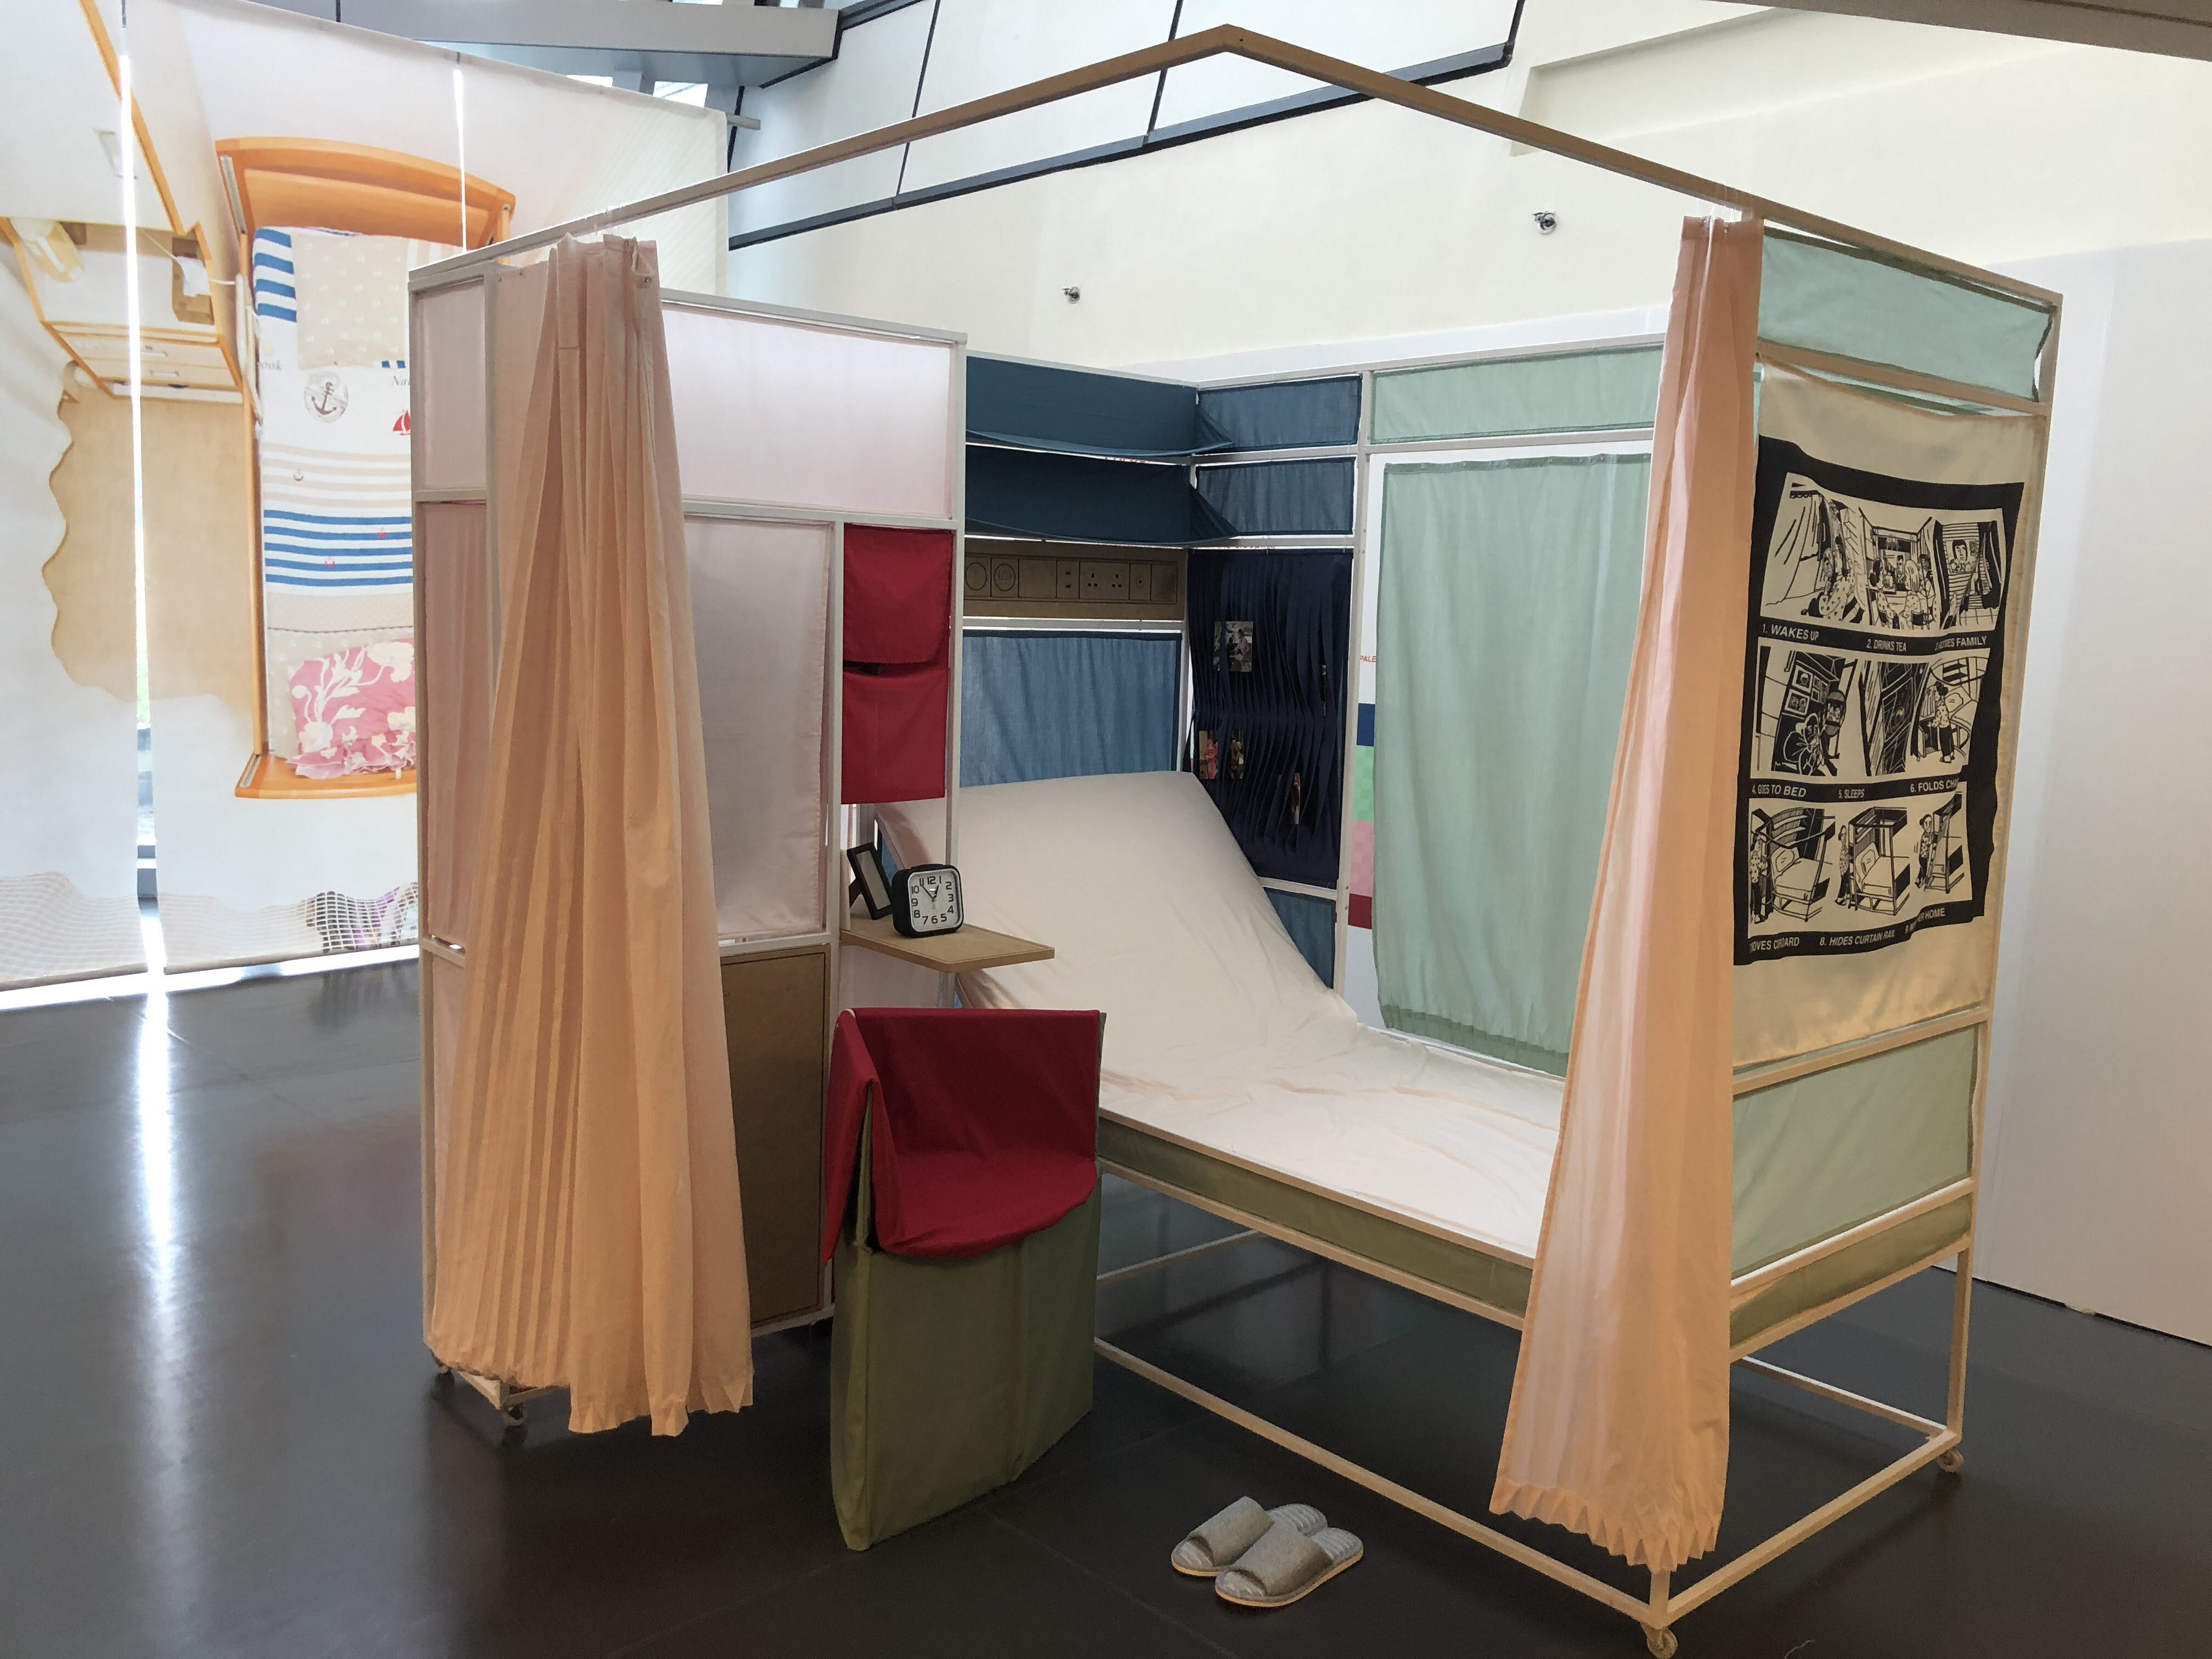 Designing a World for Everyone: 30 Years of Inclusive Design examines projects made to work for as many people as possible, including this multi-functional bed space created to improve the quality of life in Hong Kong’s cramped elderly care homes.